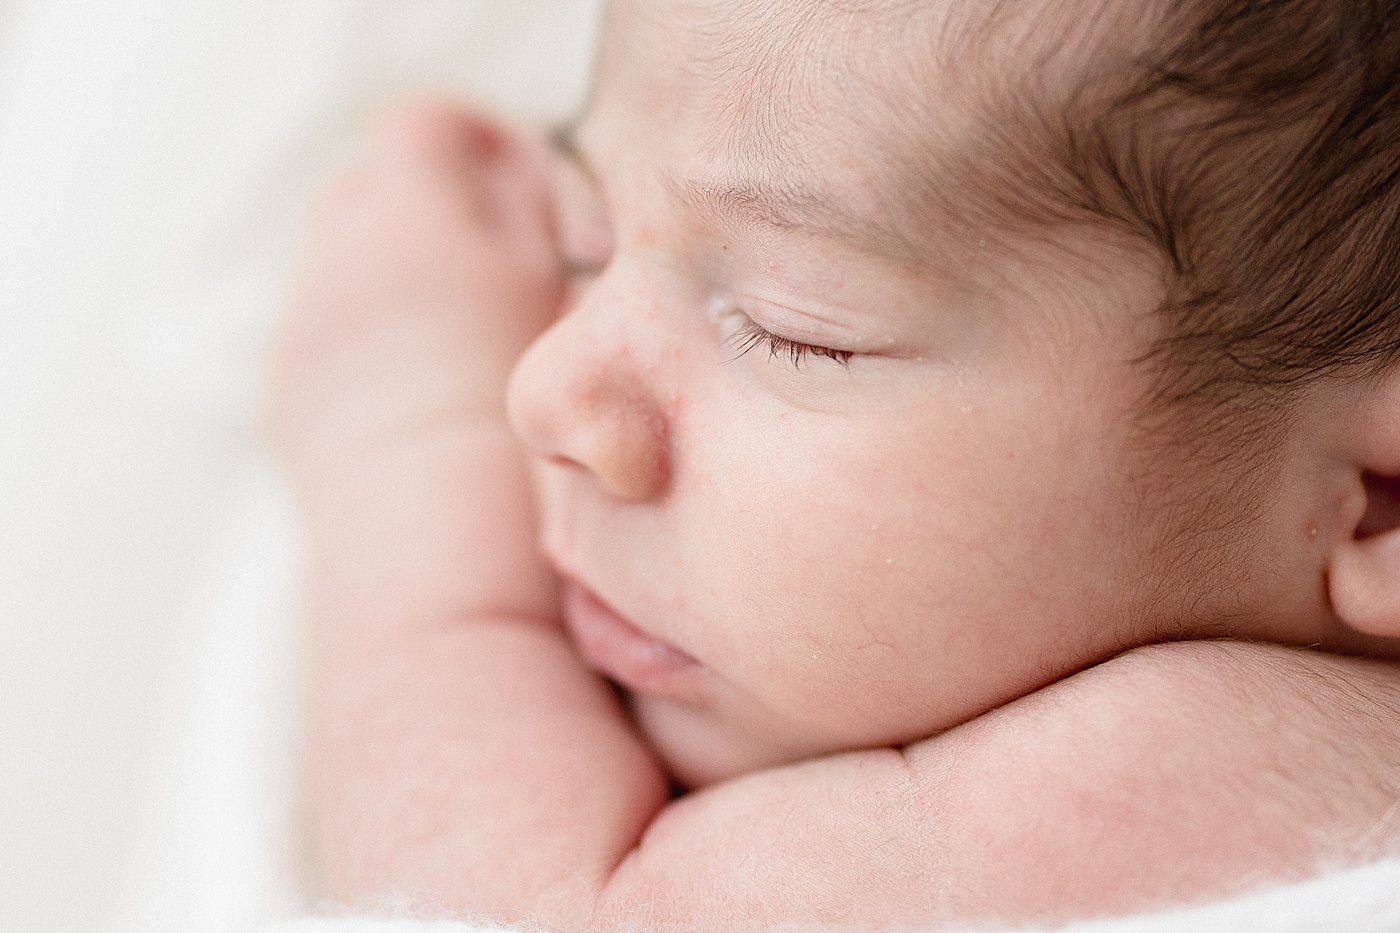 Detail photo of newborn. Photo by Brittany Elise Photography.